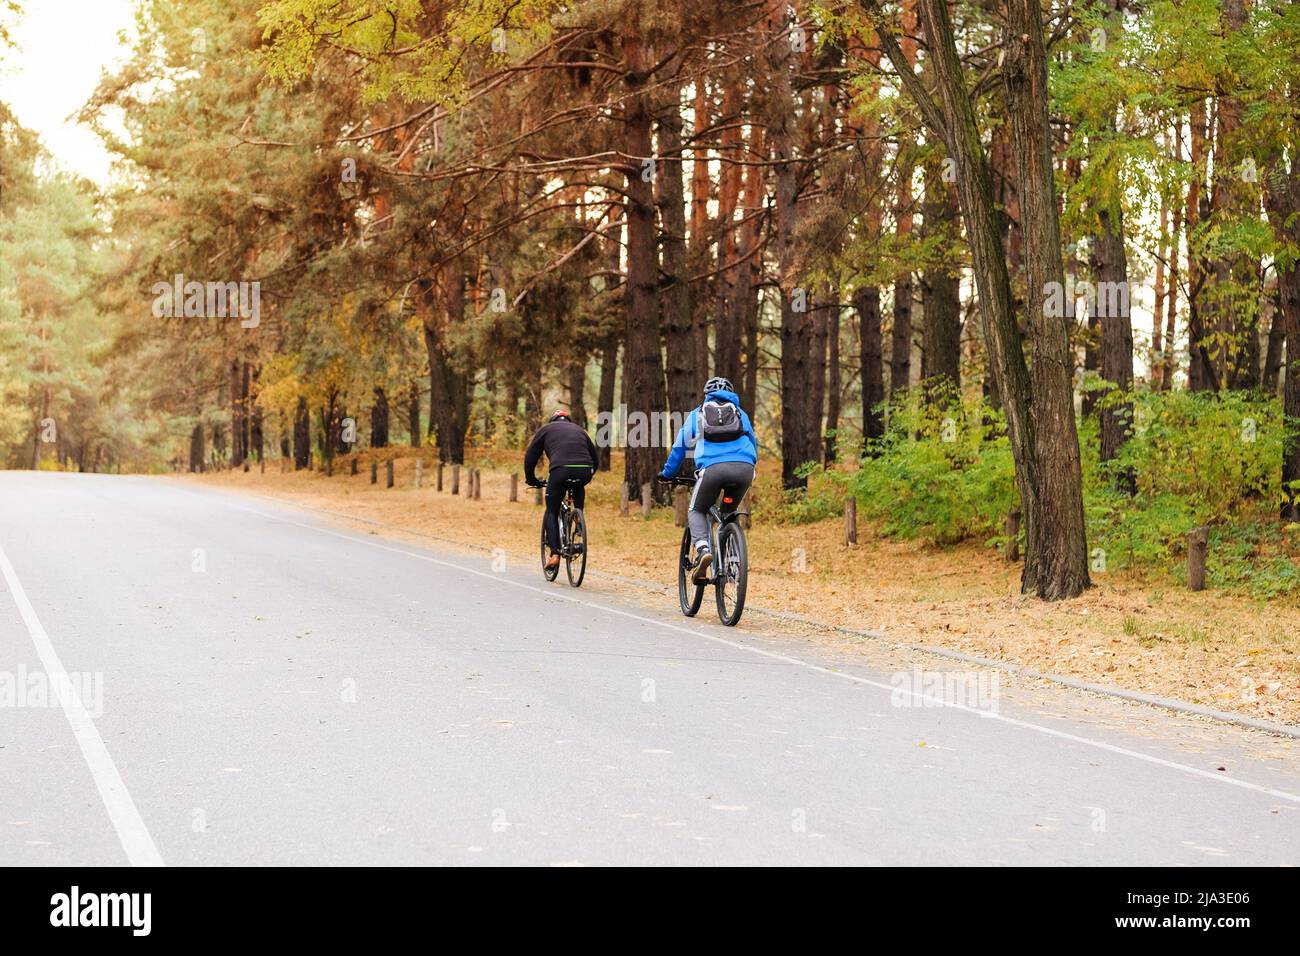 Cyclist in protective. Riding on bike in coniferous forest on sunny day among many trees. Healthy lifestyle. Sport and active life concept. Stock Photo